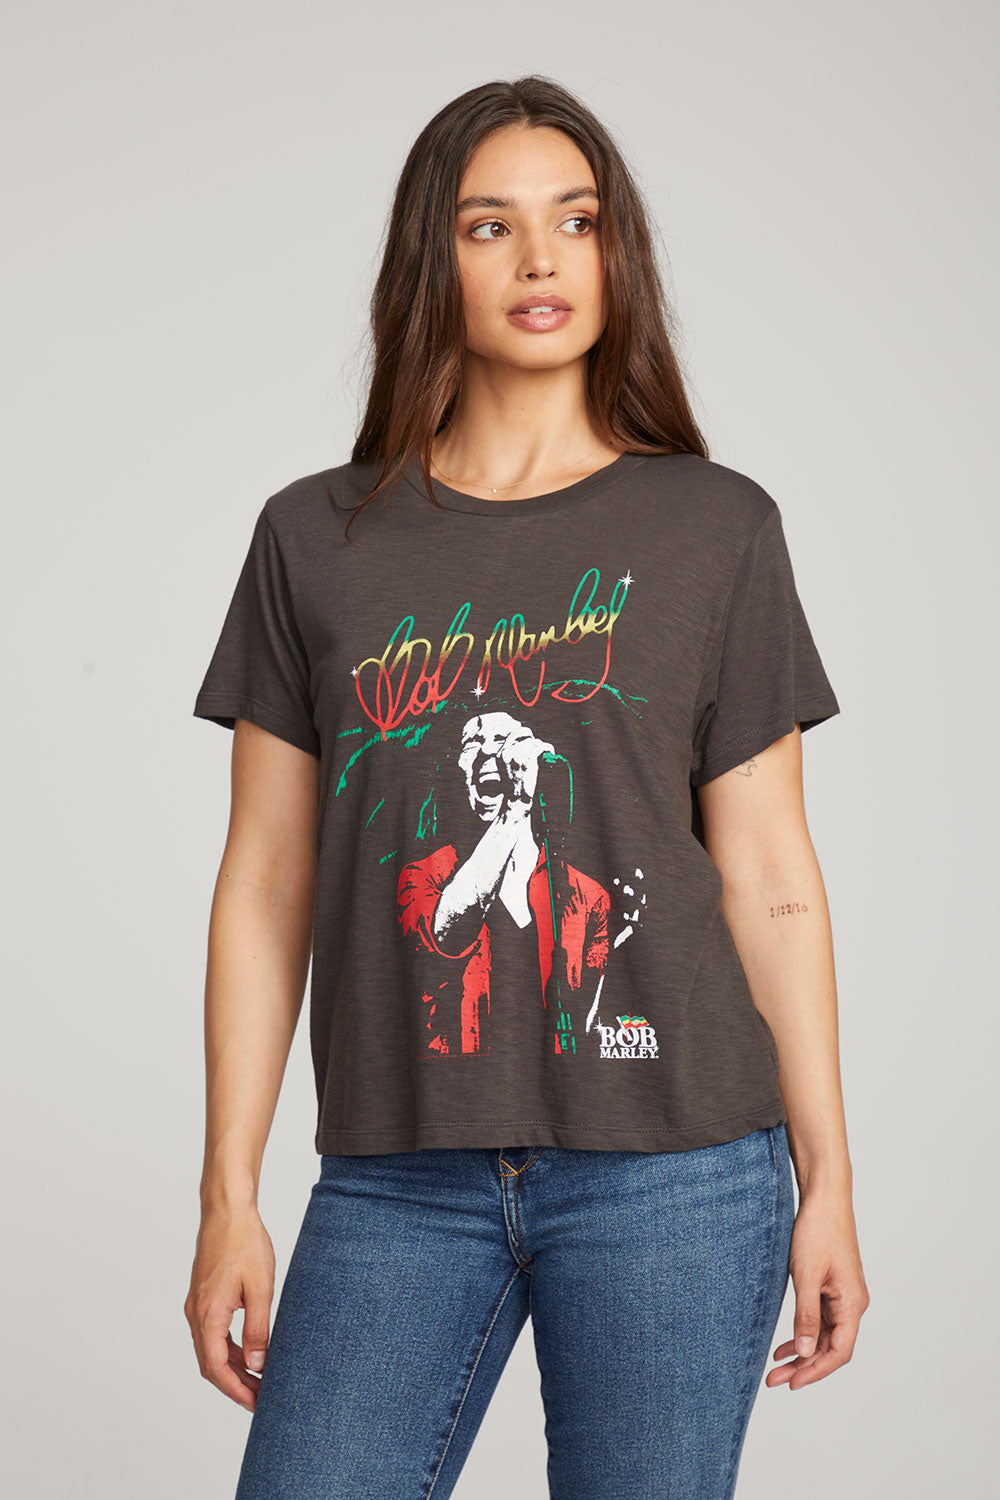 Bob Marley Live On Stage Tee WOMENS chaserbrand